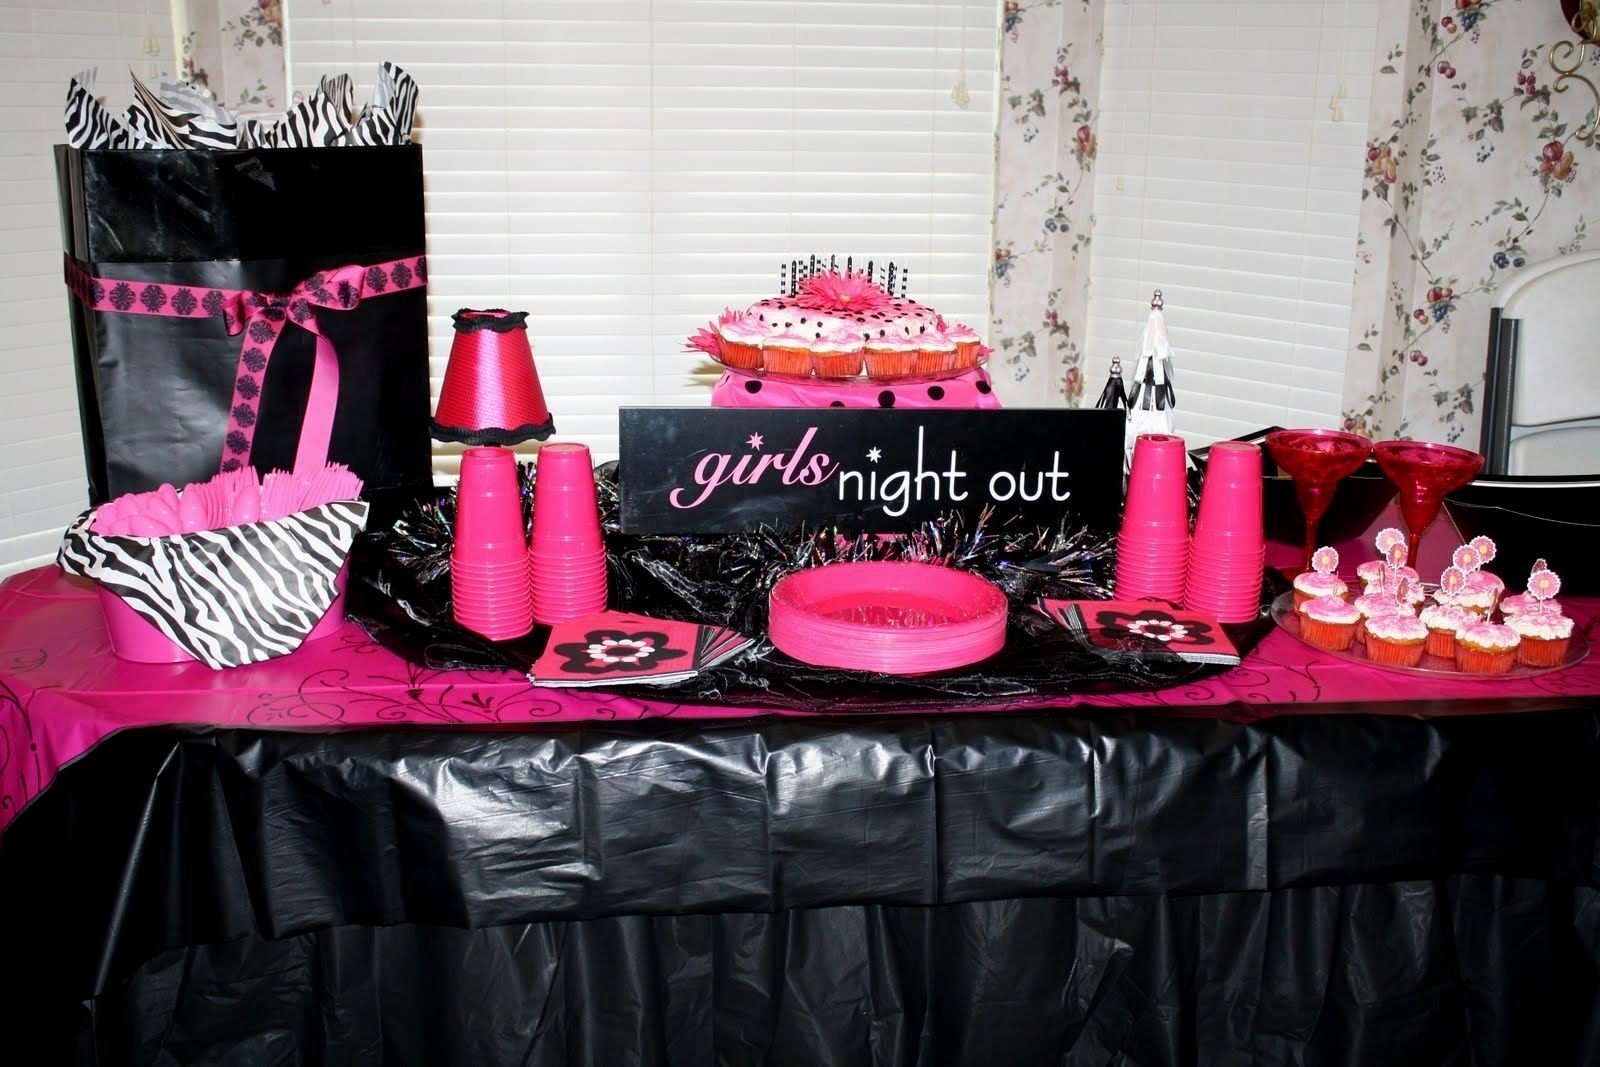 10 Beautiful Pink And Black Birthday Party Ideas pink and black party decorations decor ideas rutorrent 2022